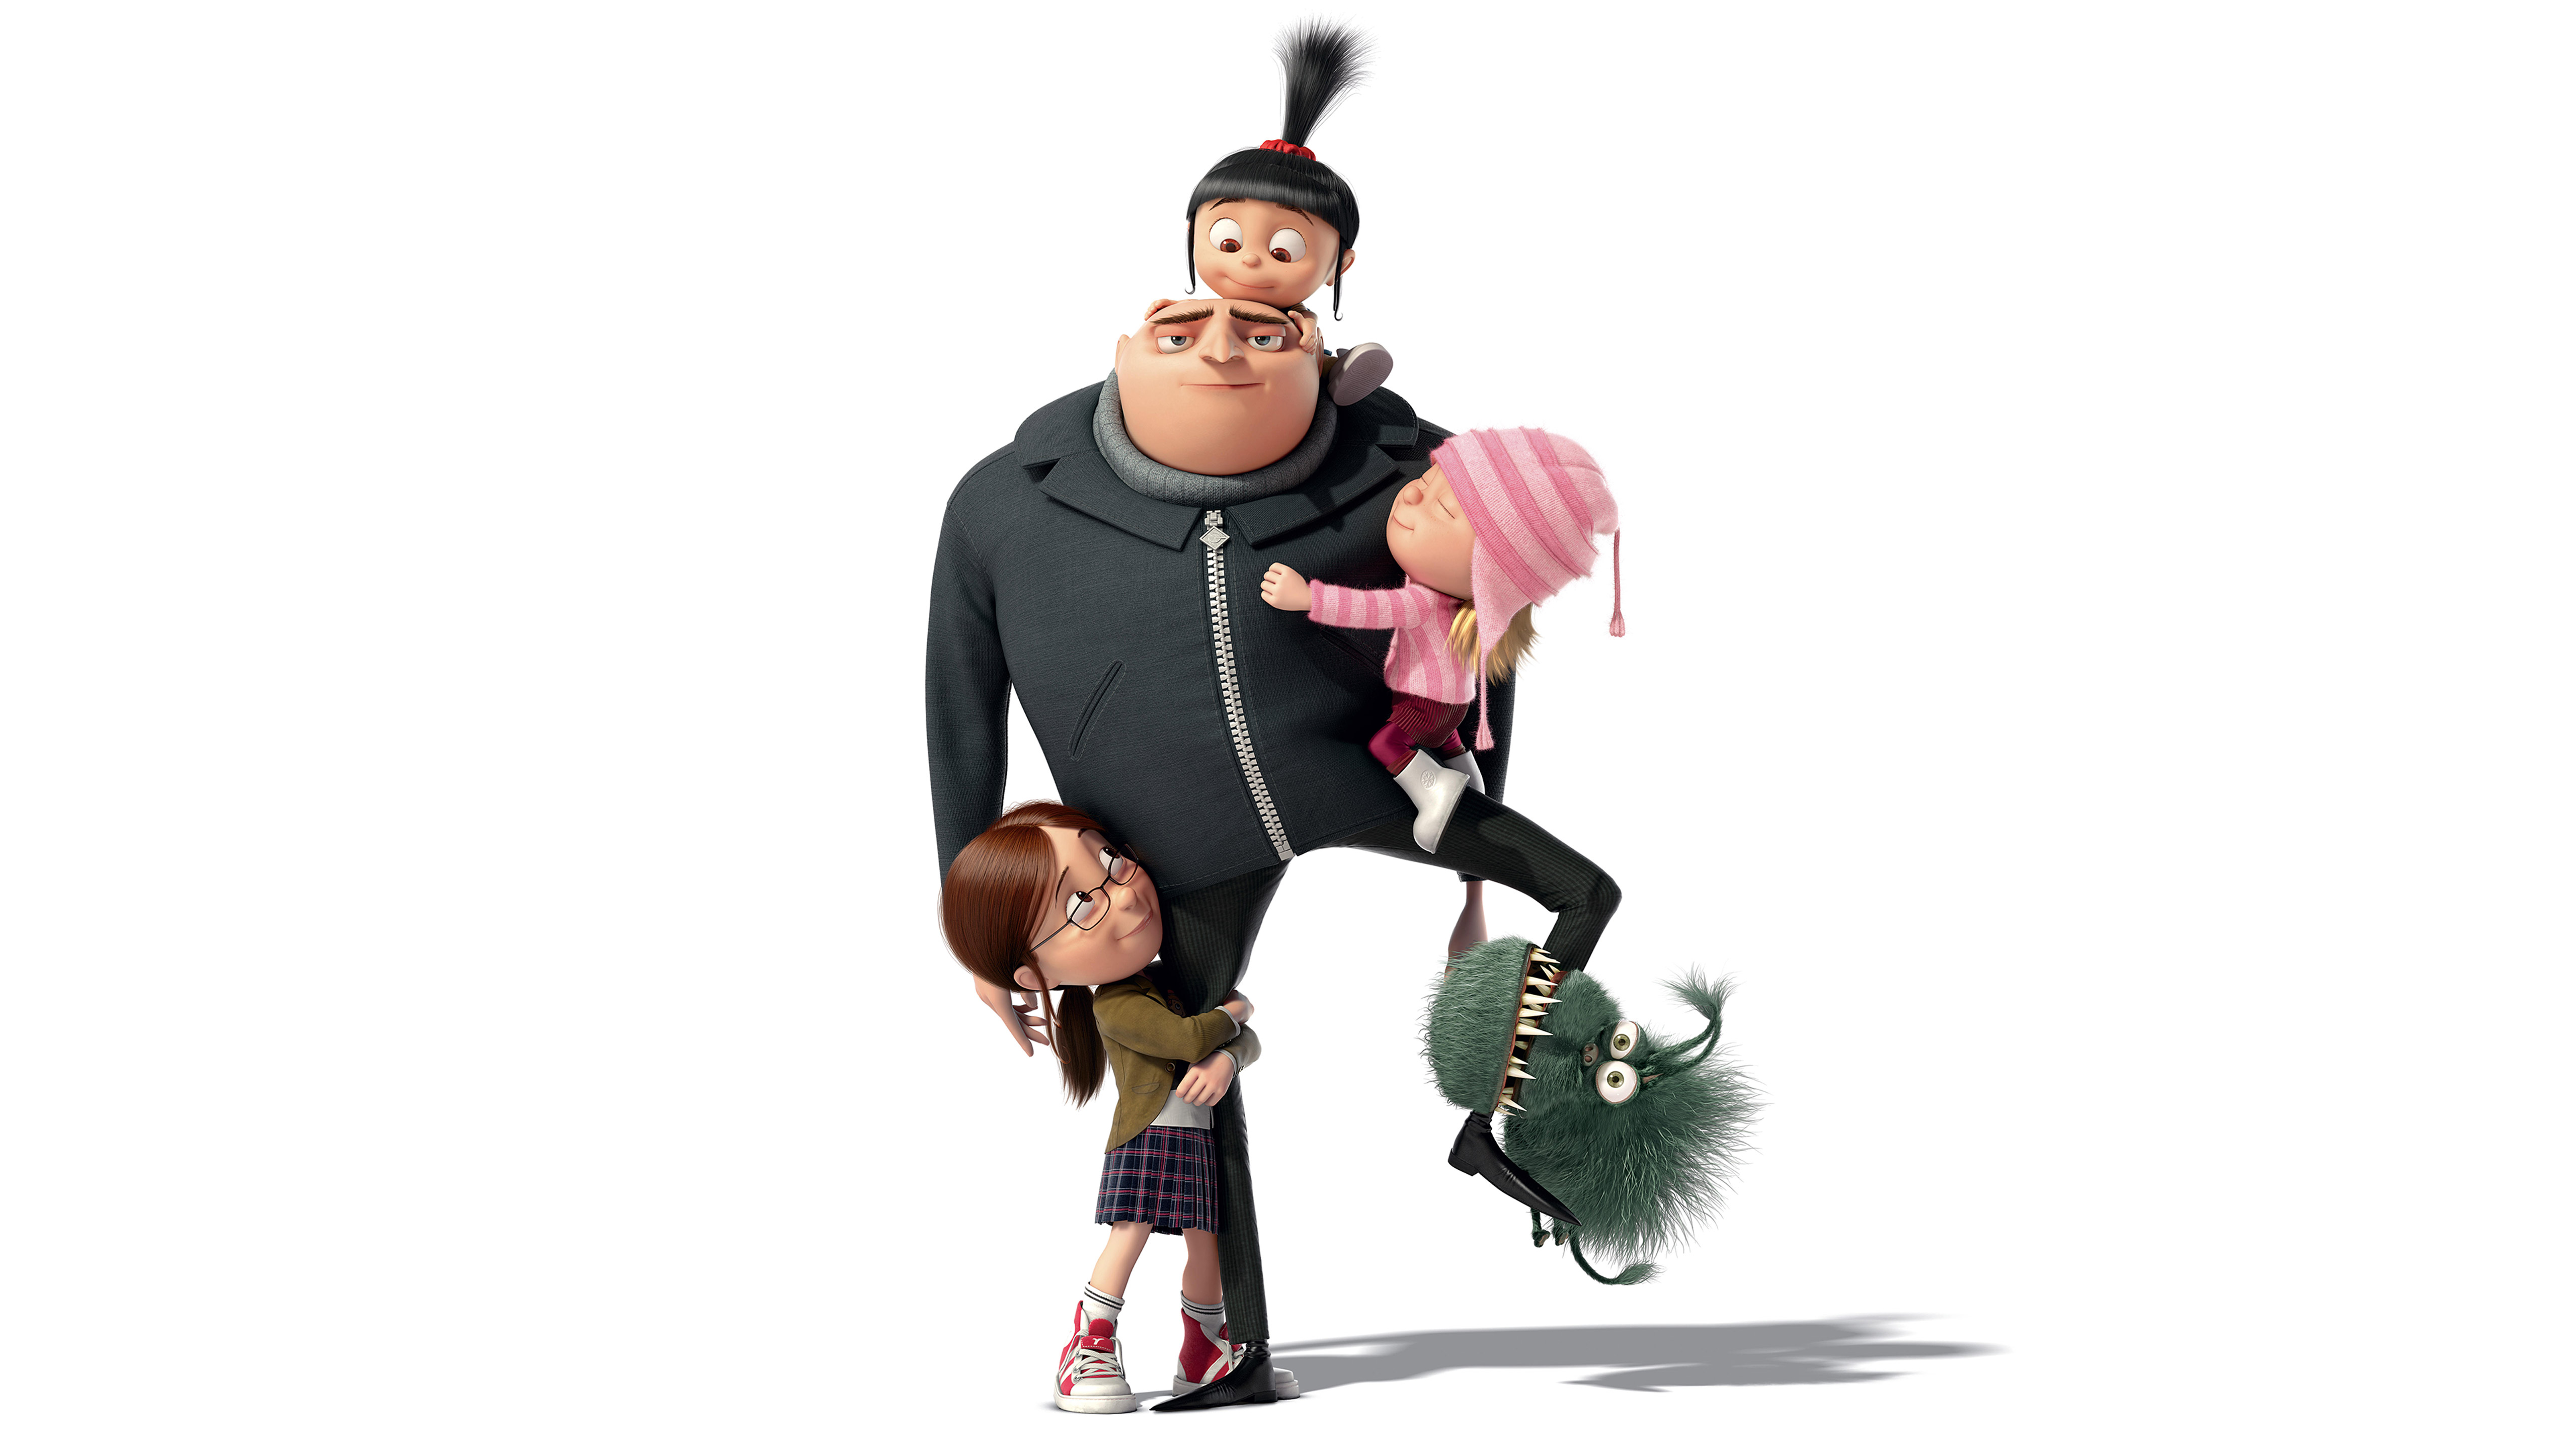 despicable-me-3-gru-wallpaper-hd-movies-4k-wallpapers-images-photos